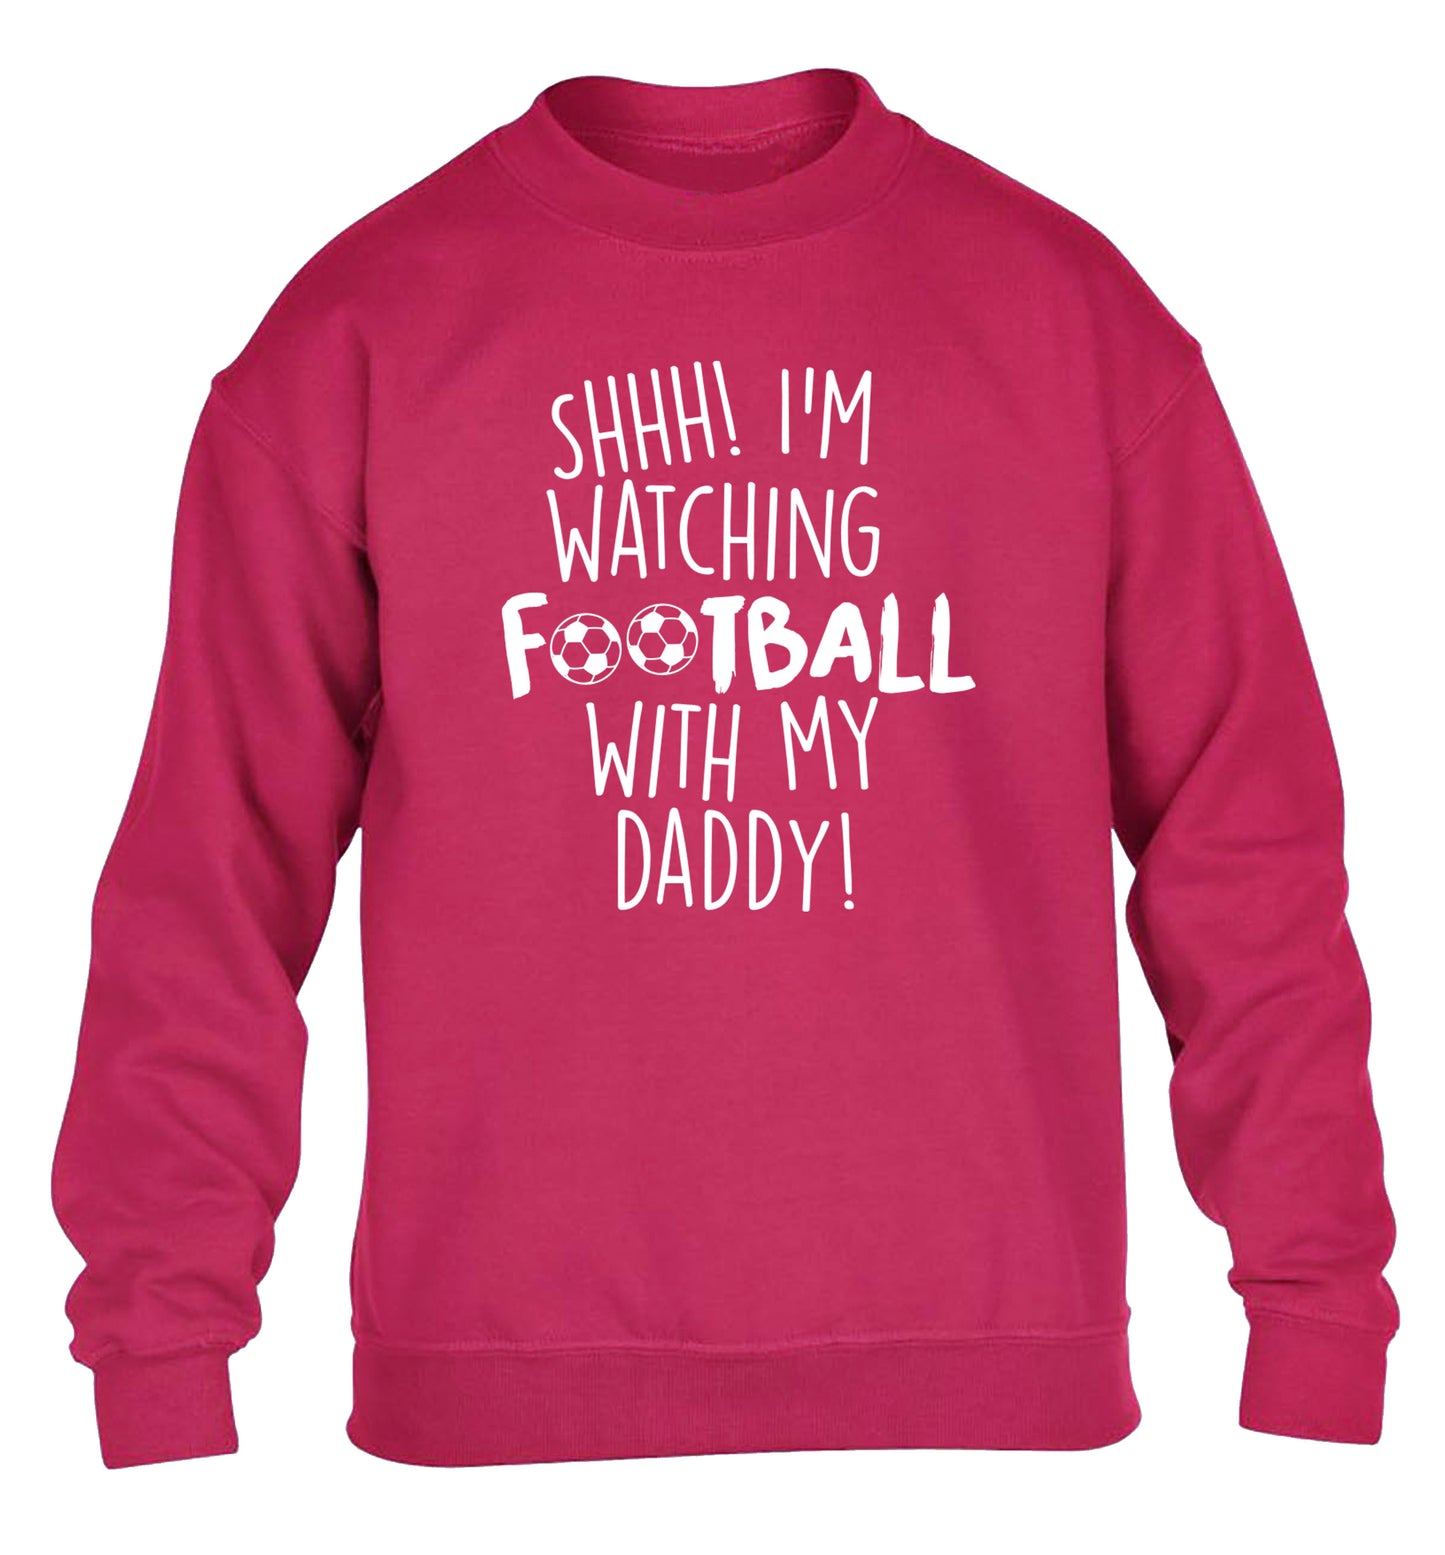 Shhh I'm watching football with my daddy children's pink sweater 12-14 Years